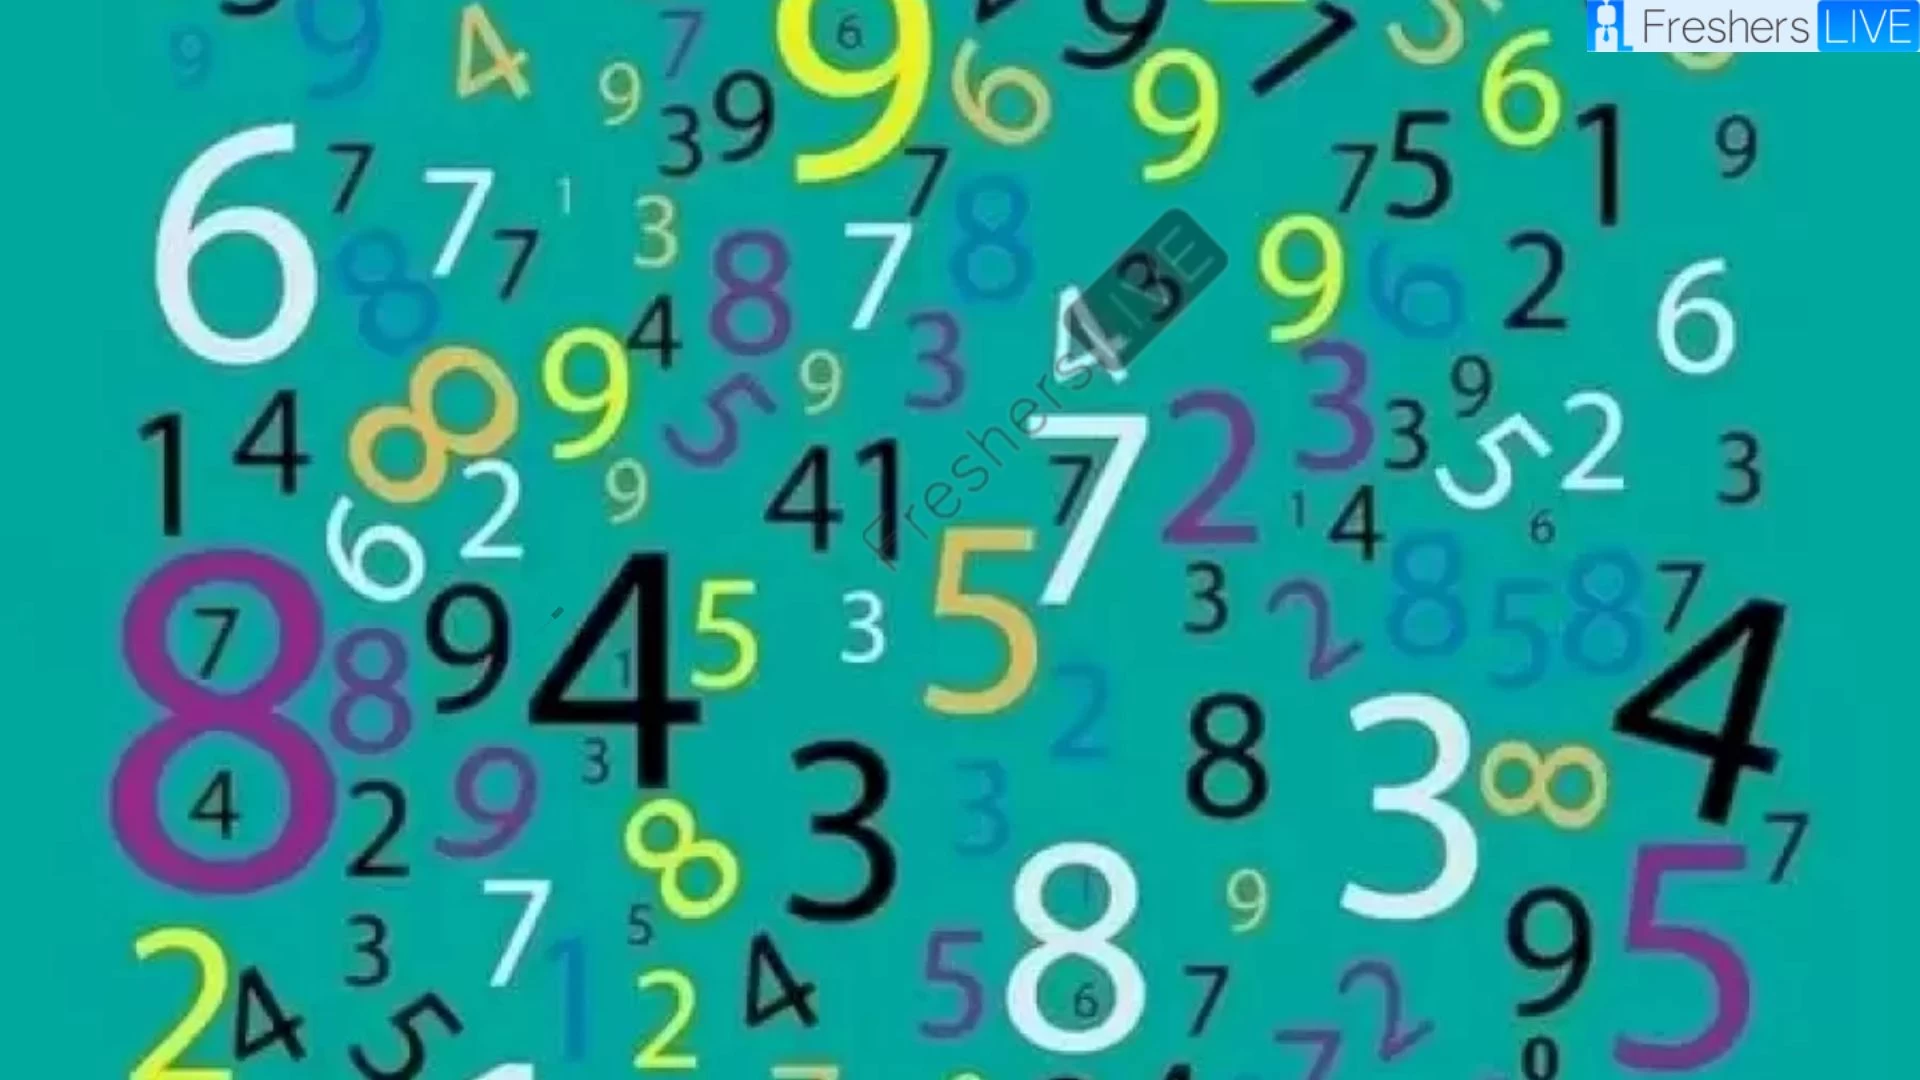 Only Mathematics Lovers Can Spot The Hidden Zero Among These Various Numbers In Less Than 5 Seconds